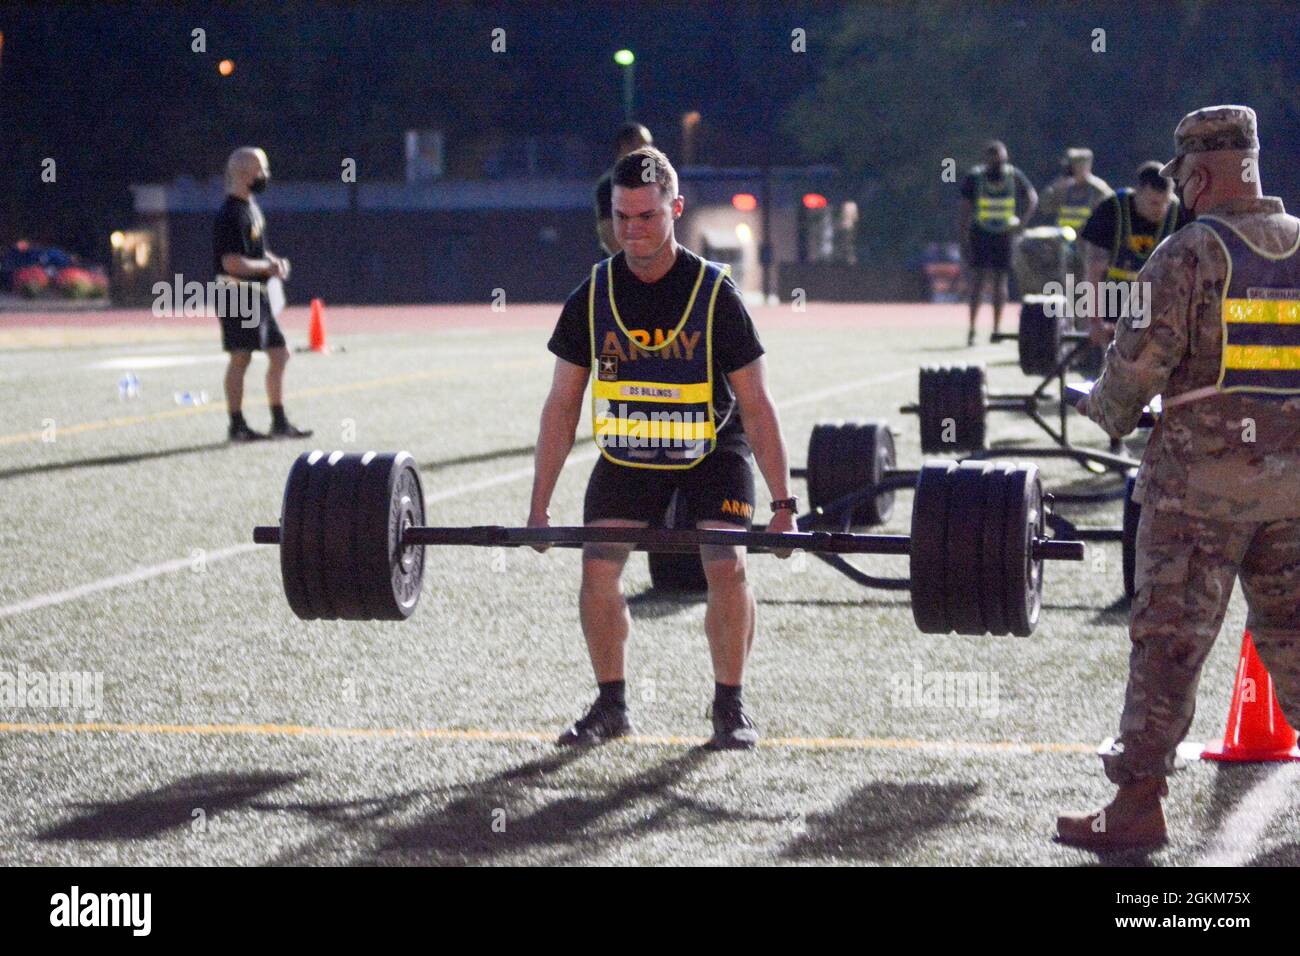 Staff Sgt. Tyler A. Billings, Best Warrior/Drill Sergeant of the Year competitor, executes the deadlift portion of Army Combat Fitness Test Monday morning at Williams Stadium, Fort Lee. The winner of the CASCOM competition will be announced at an award ceremony Thursday morning. Stock Photo